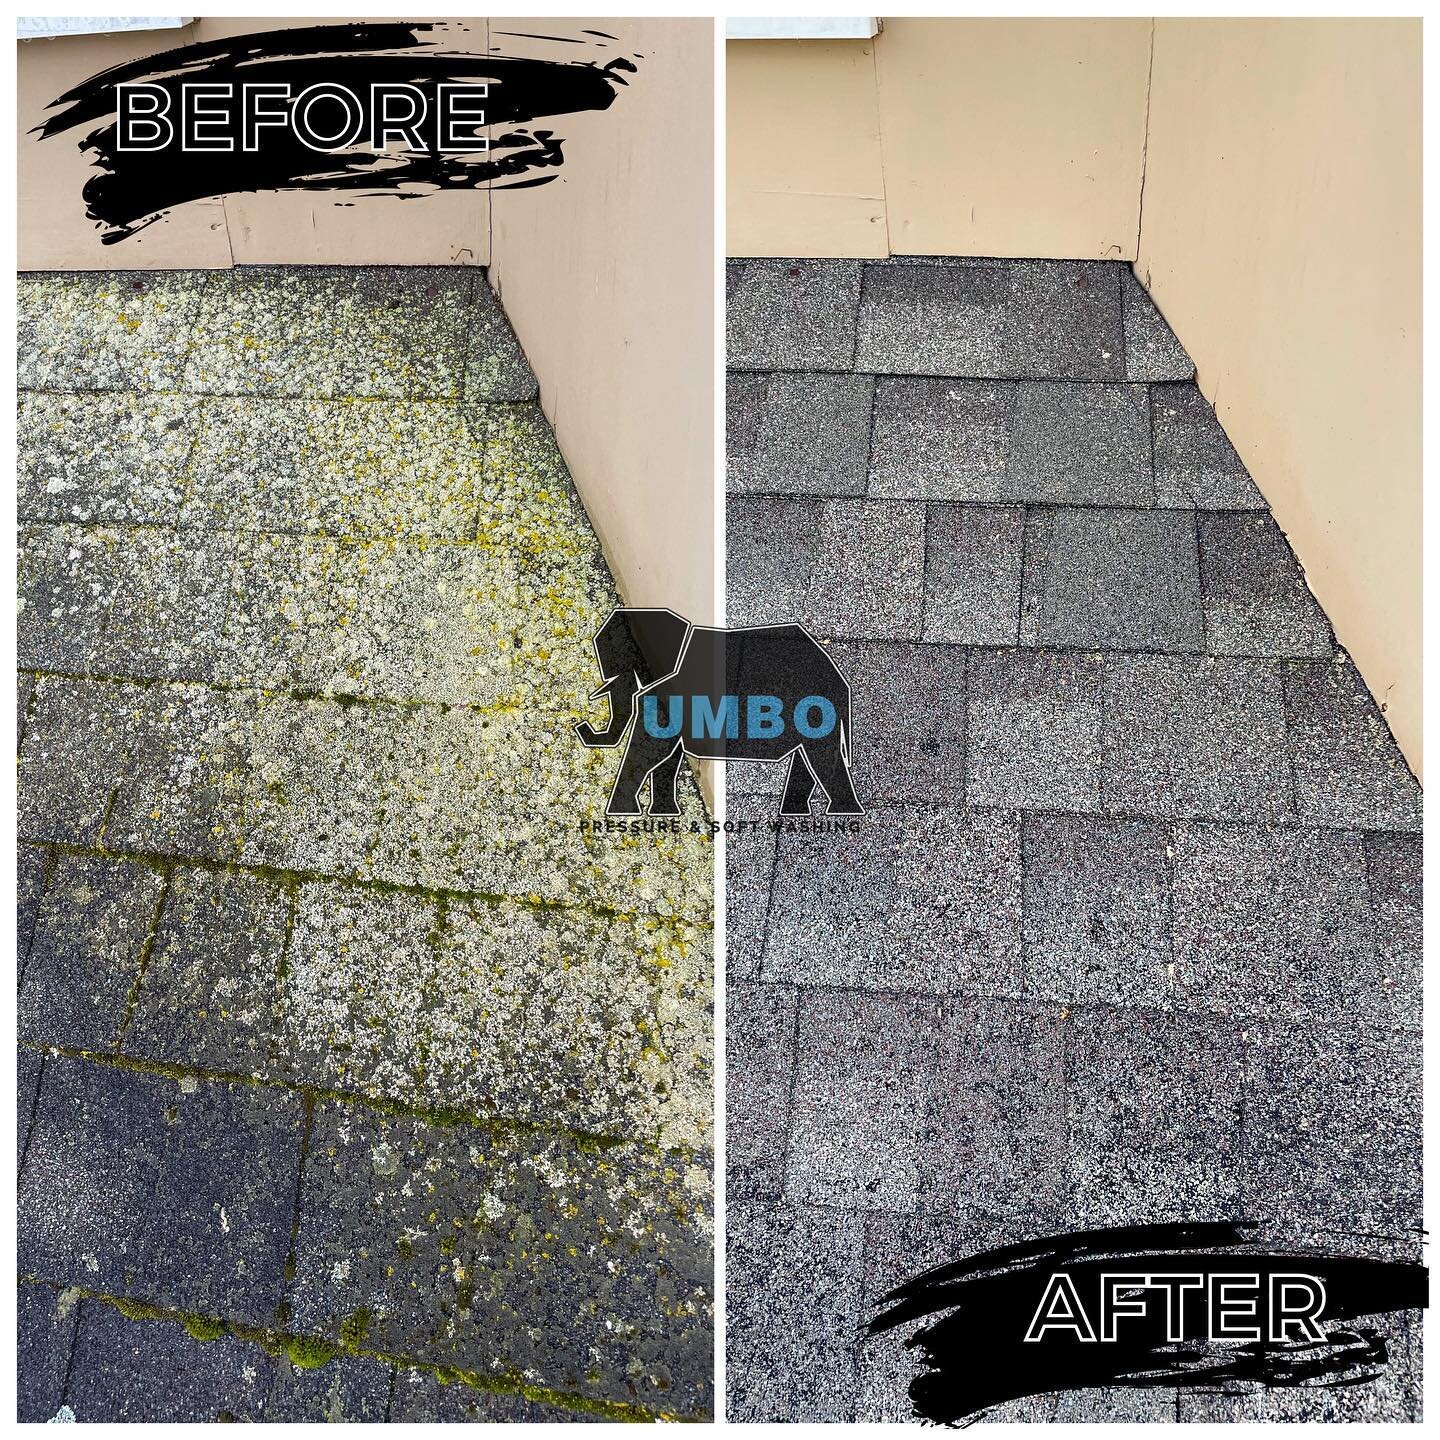 Even roofs can be safely cleaned to extend life and restore their beauty!#beforeandafter #roofwashing #grandrapidssmallbusiness #exteriorcleaningdoneright